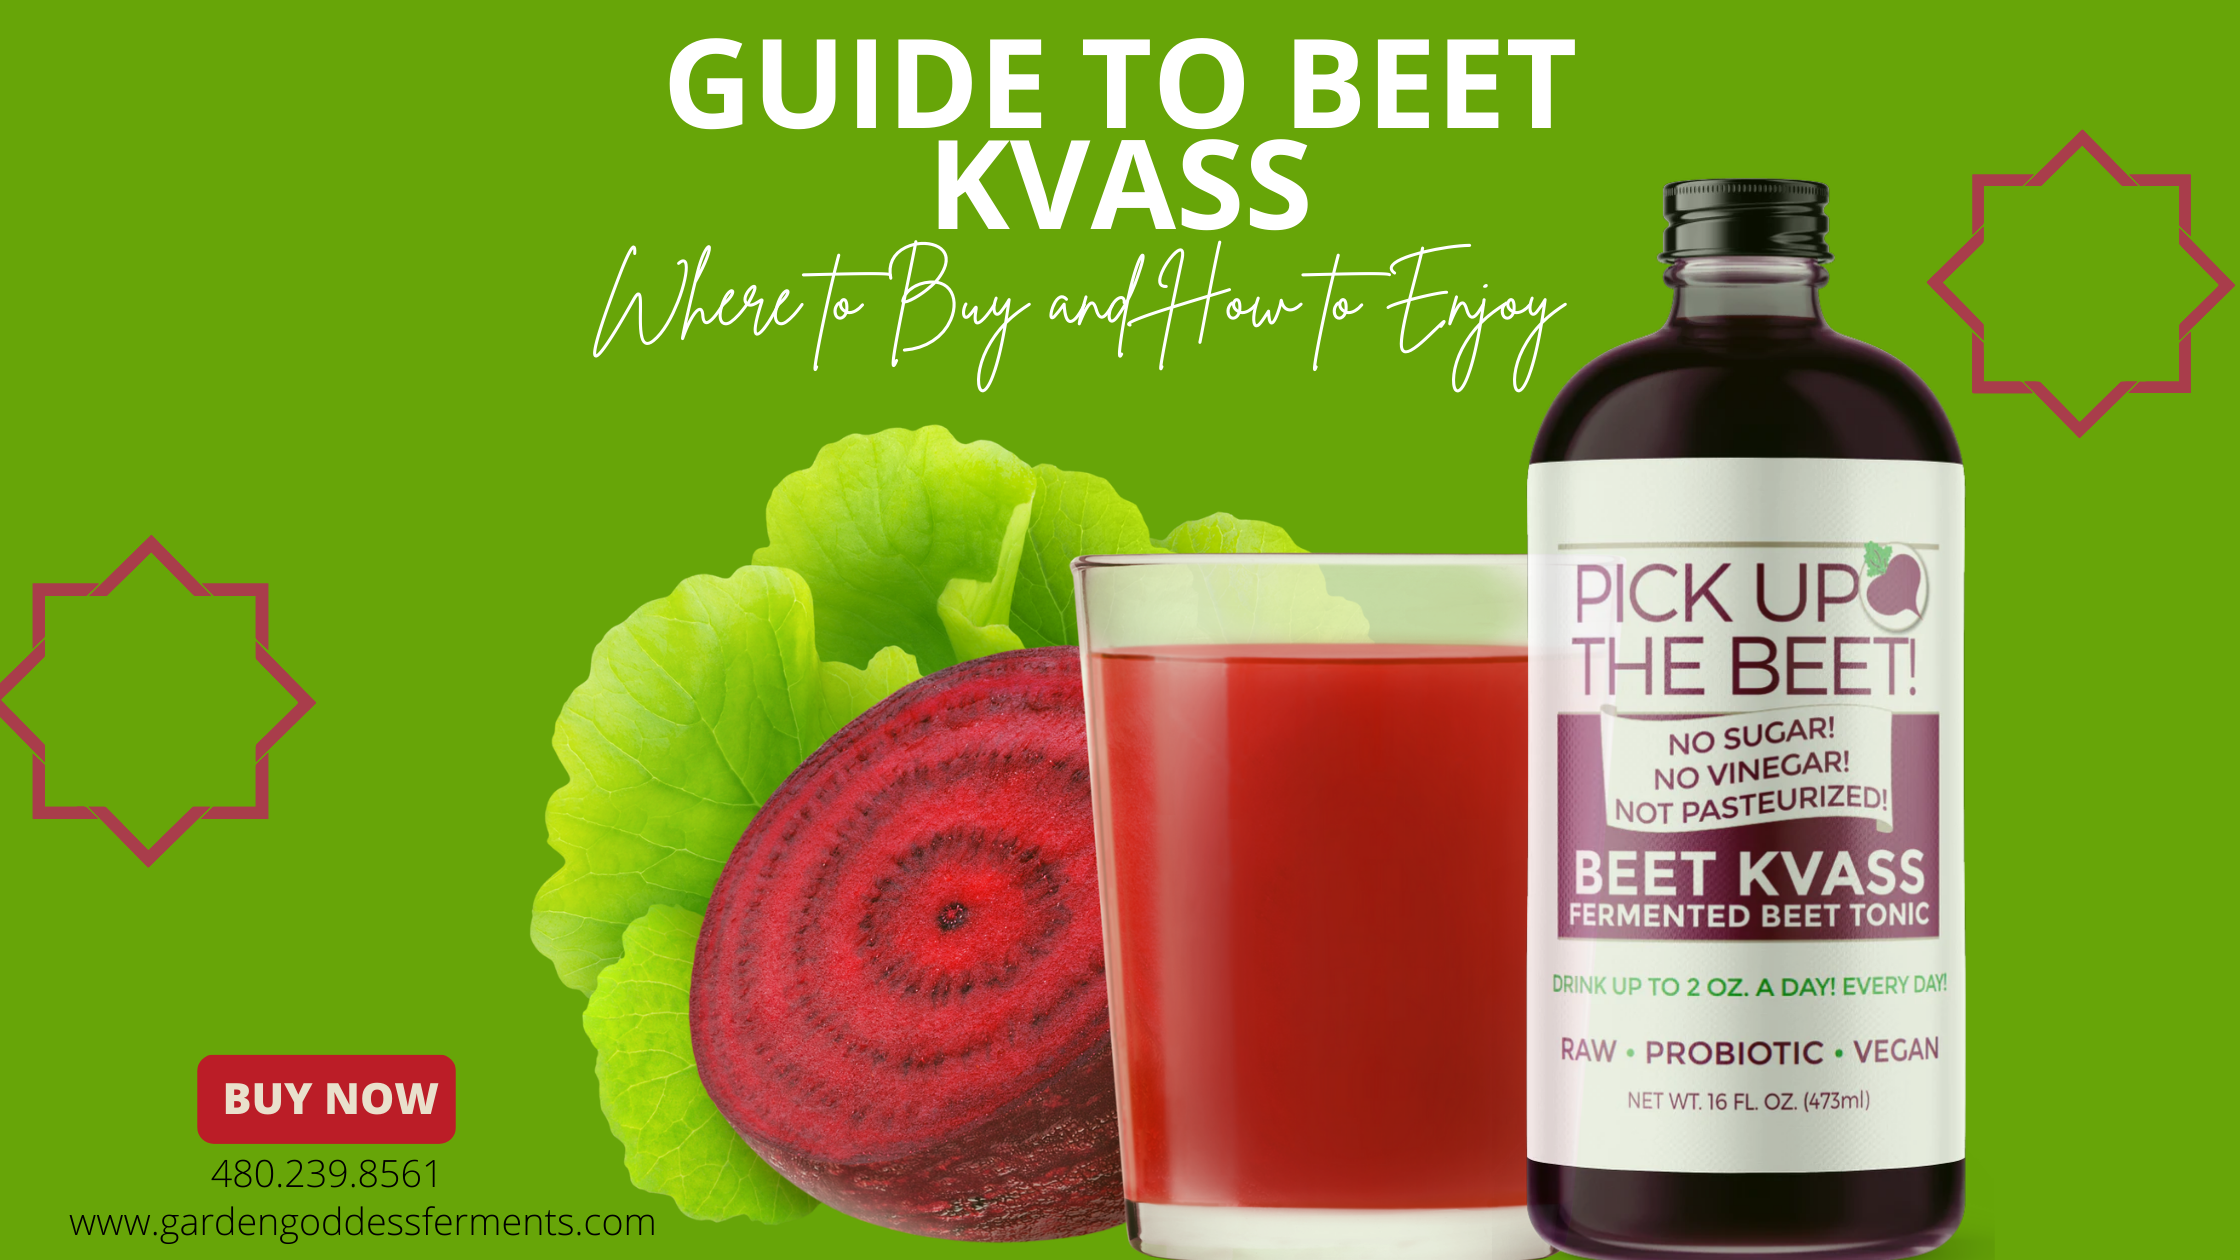 The Ultimate Guide to Beet Kvass: Where to Buy and How to Enjoy